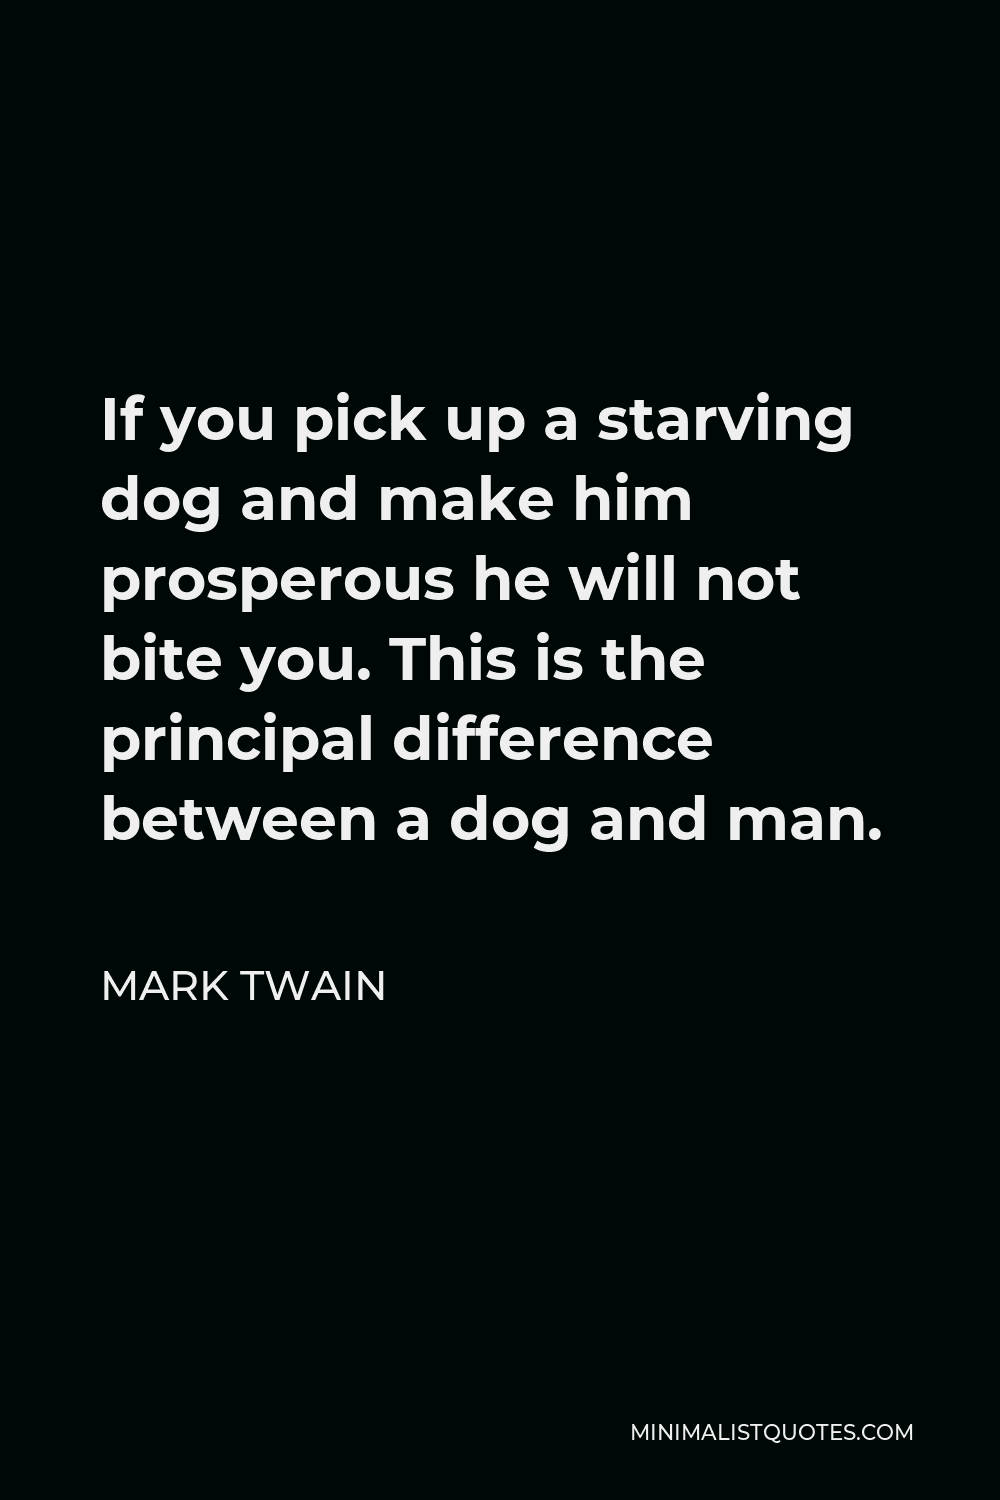 Mark Twain Quote: If you pick up a starving dog and make him prosperous he  will not bite you. This is the principal difference between a dog and man.